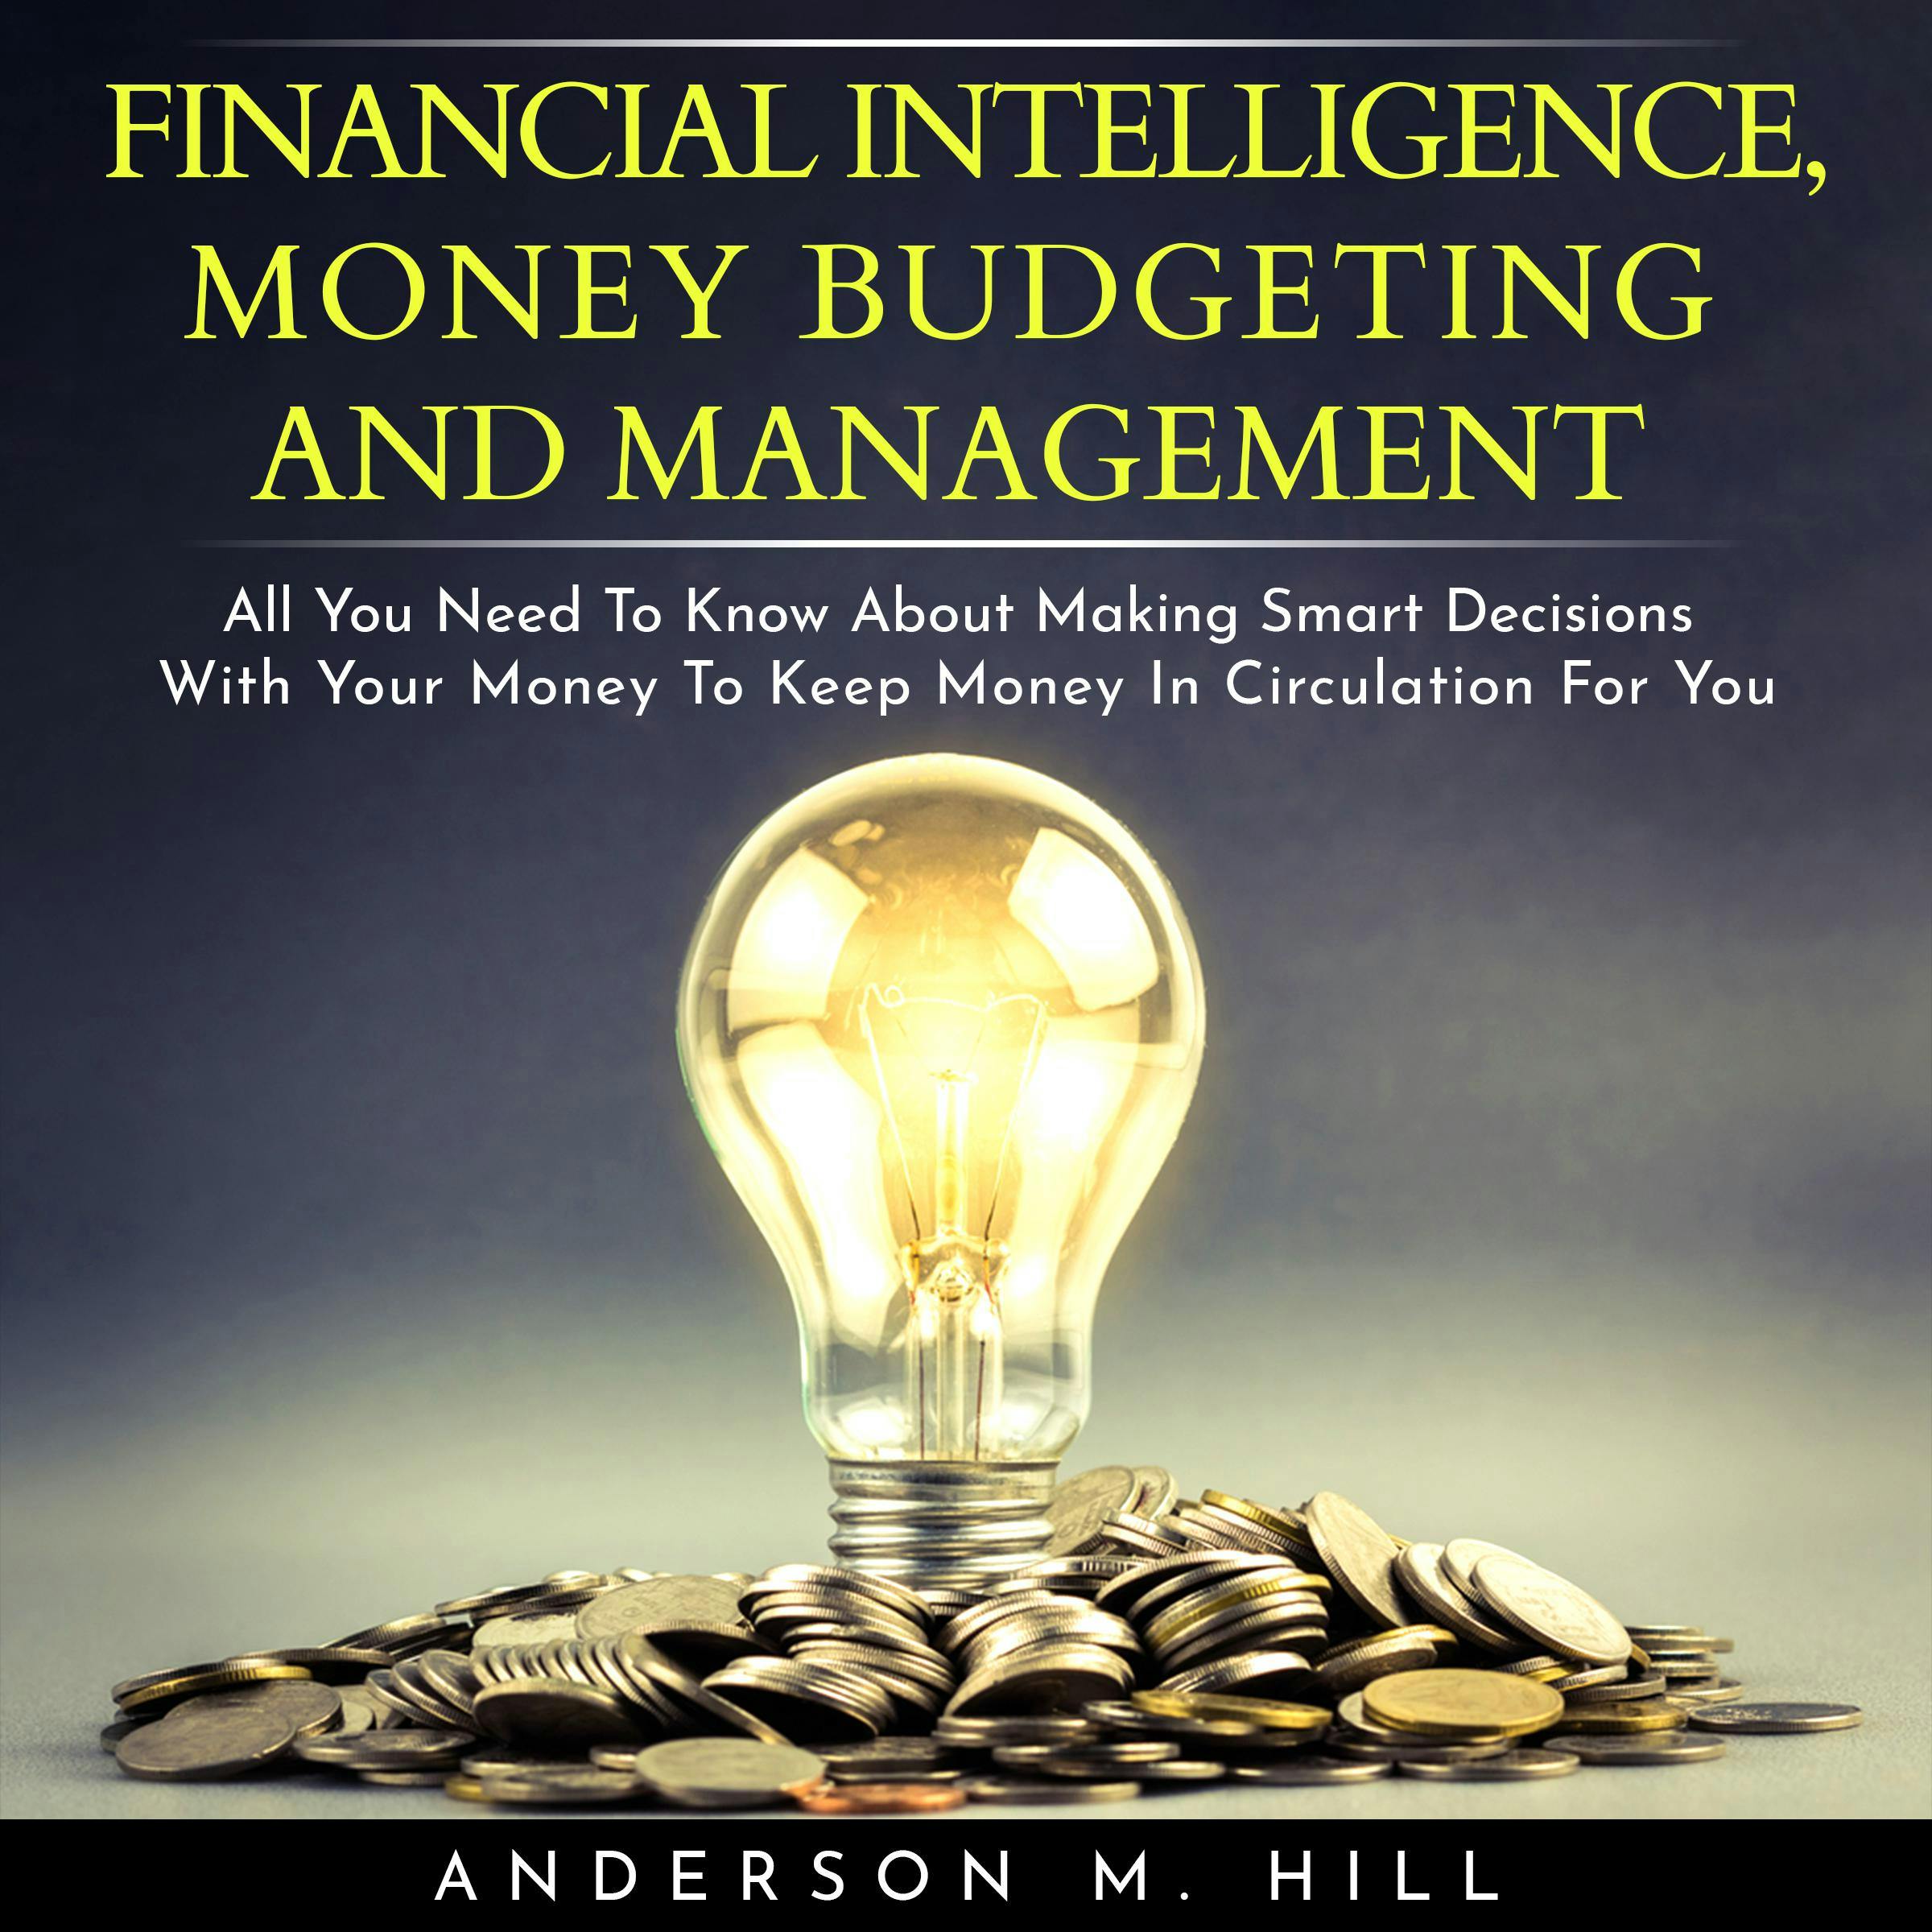 FINANCIAL INTELLIGENCE, MONEY BUDGETING AND MANAGEMENT : ALL YOU NEED TO KNOW ABOUT MAKING SMART DECISIONS WITH YOUR MONEY TO KEEP MONEY IN CIRCULATION FOR YOU - Anderson M. Hill